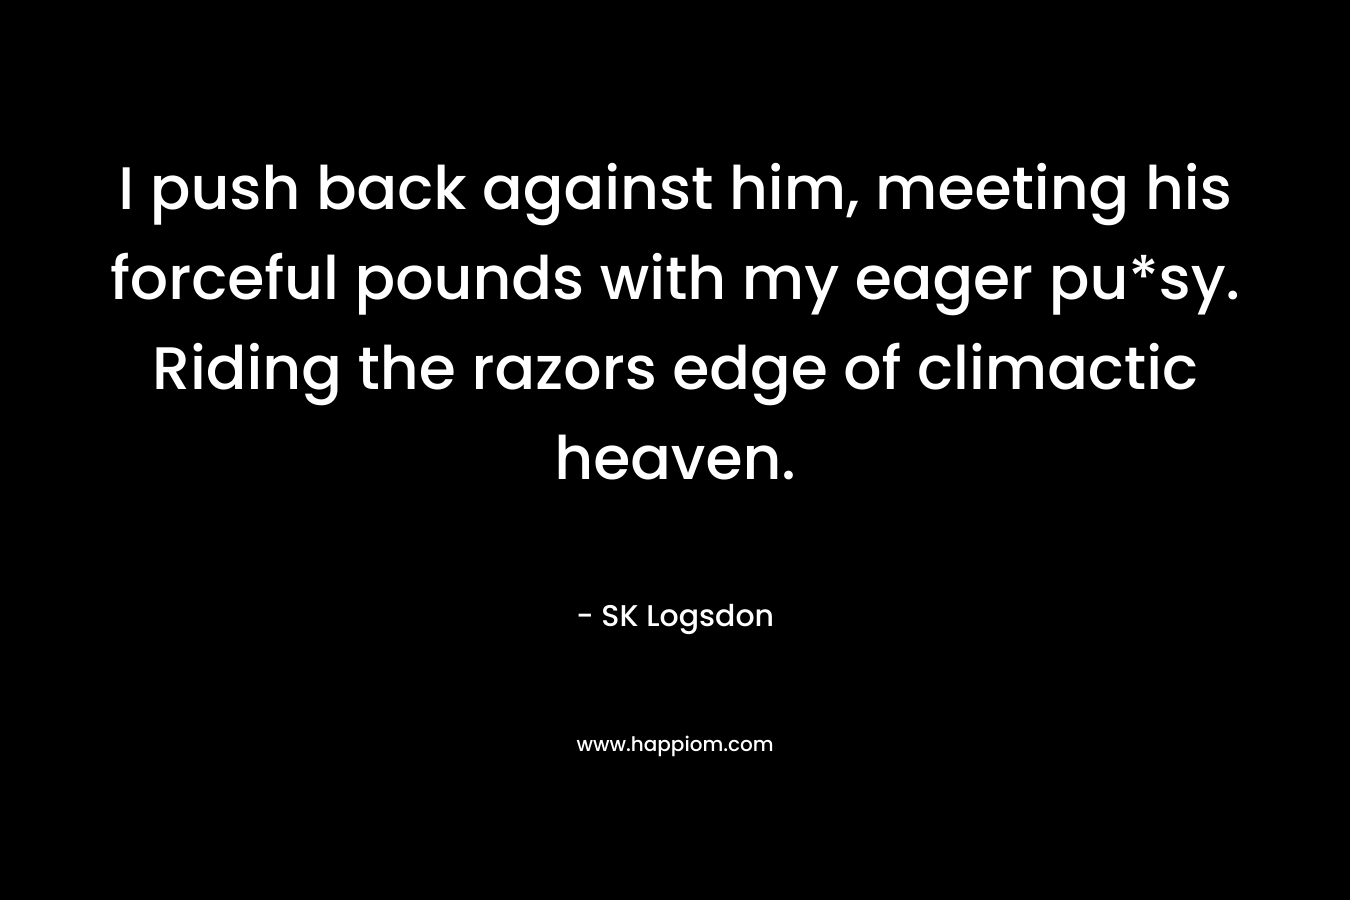 I push back against him, meeting his forceful pounds with my eager pu*sy. Riding the razors edge of climactic heaven. – SK Logsdon